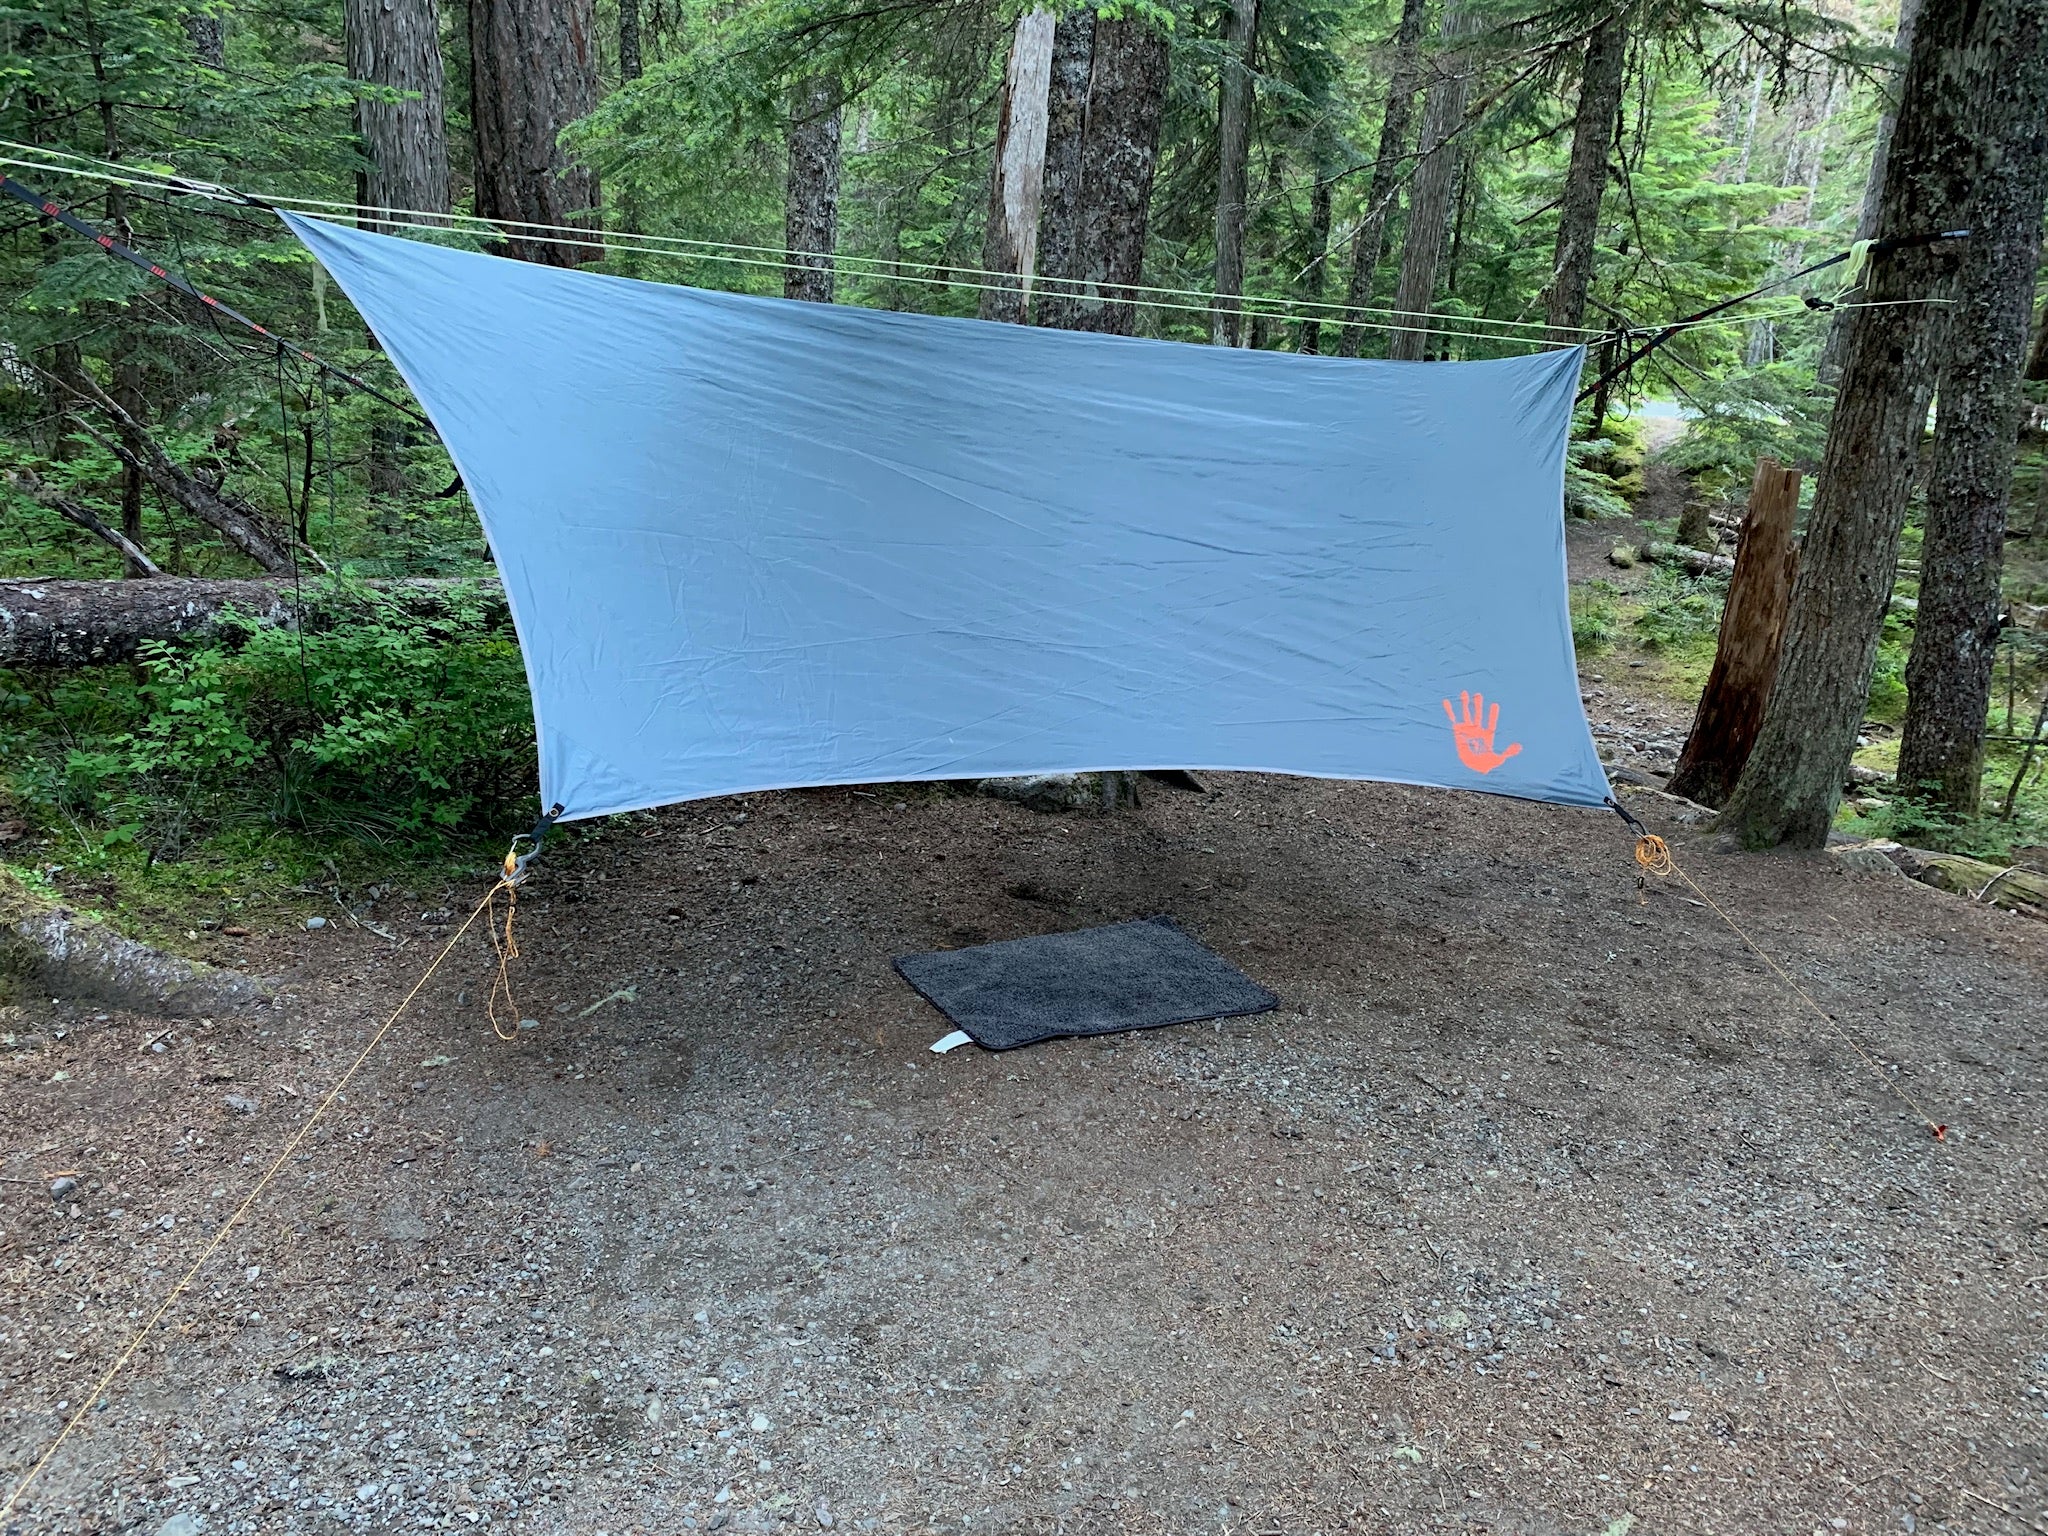 Hammock setup, still room for a small tent nearby.